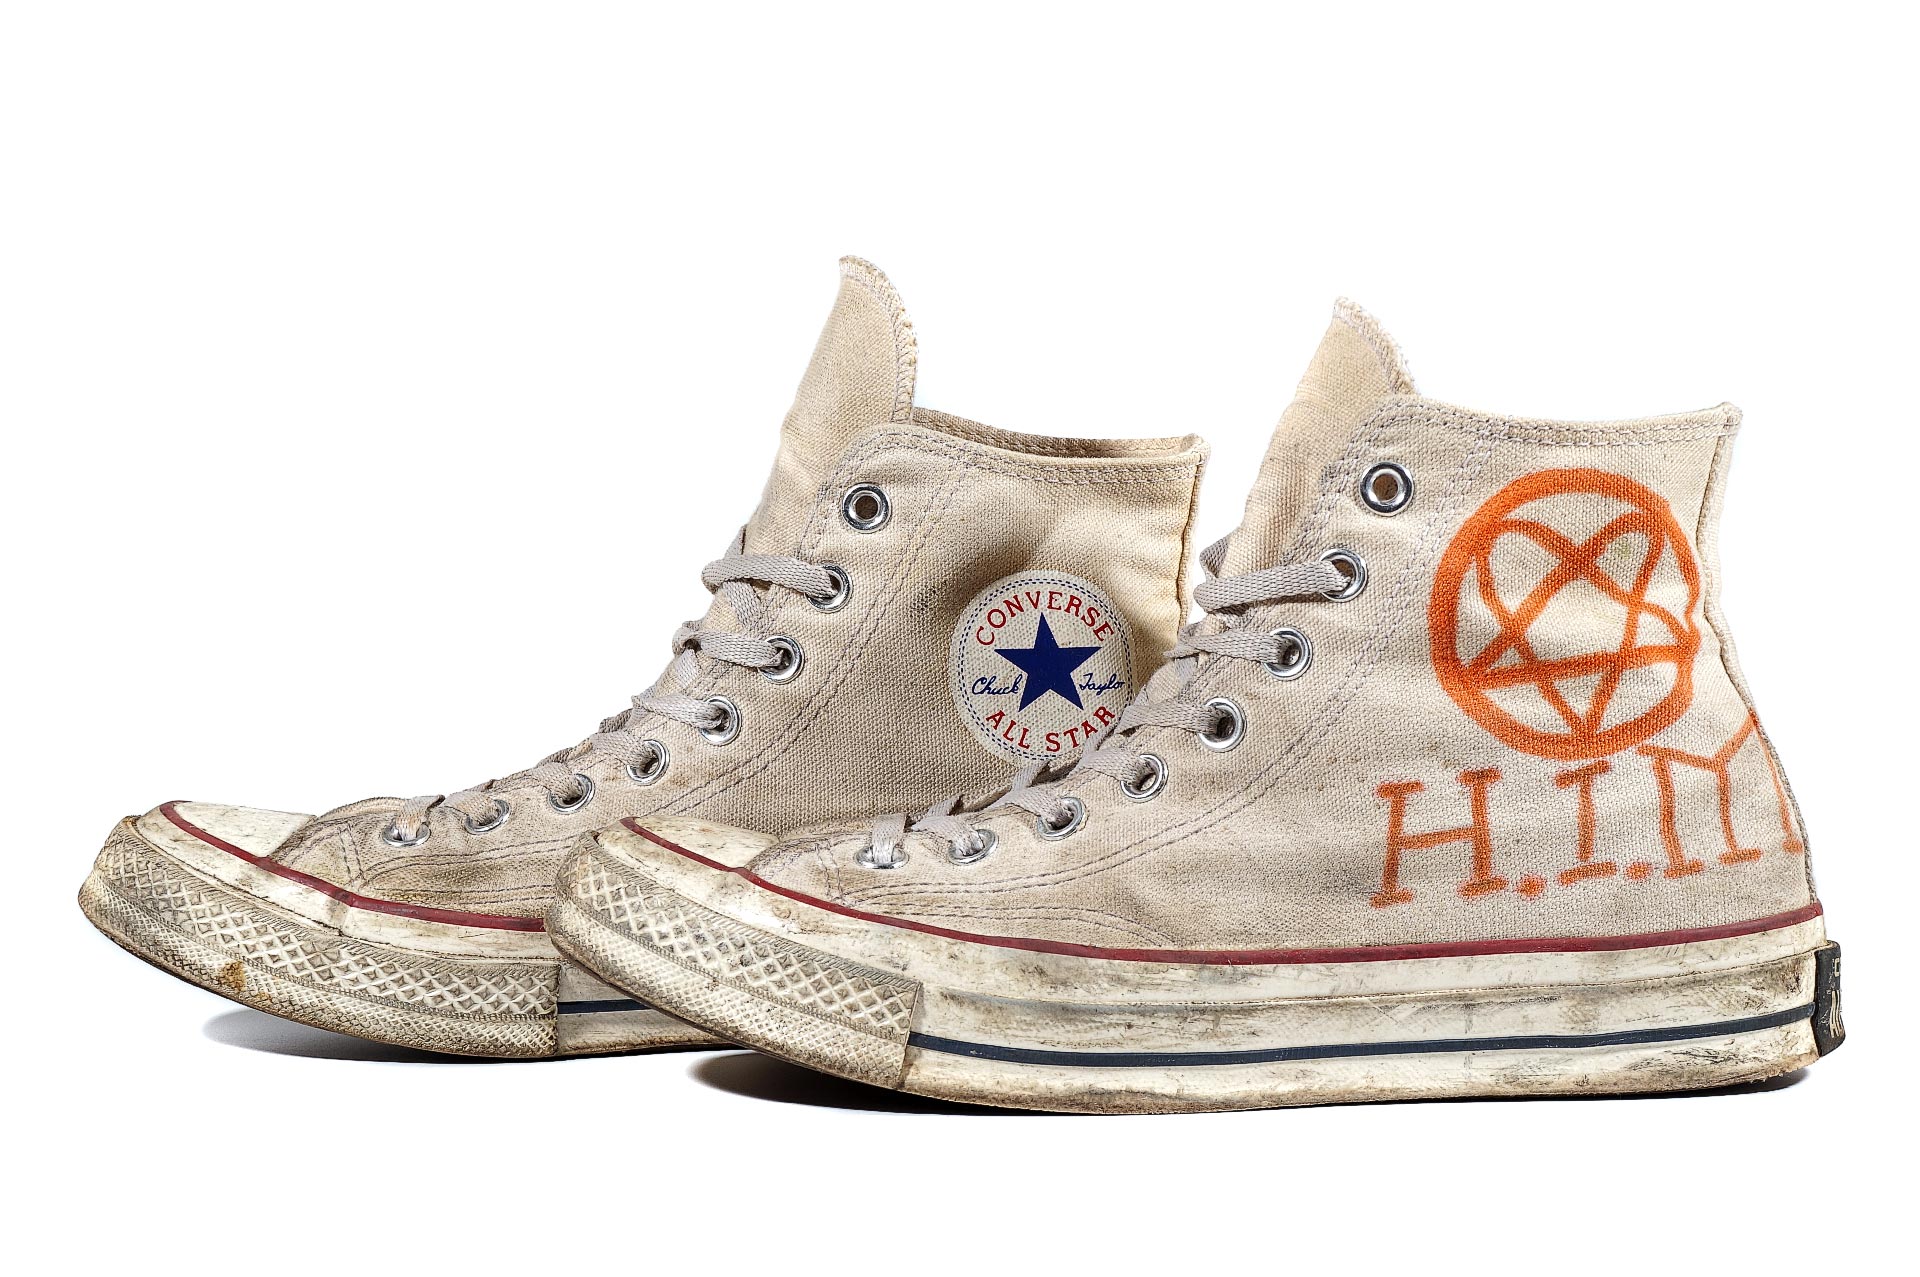 used converse sneakers